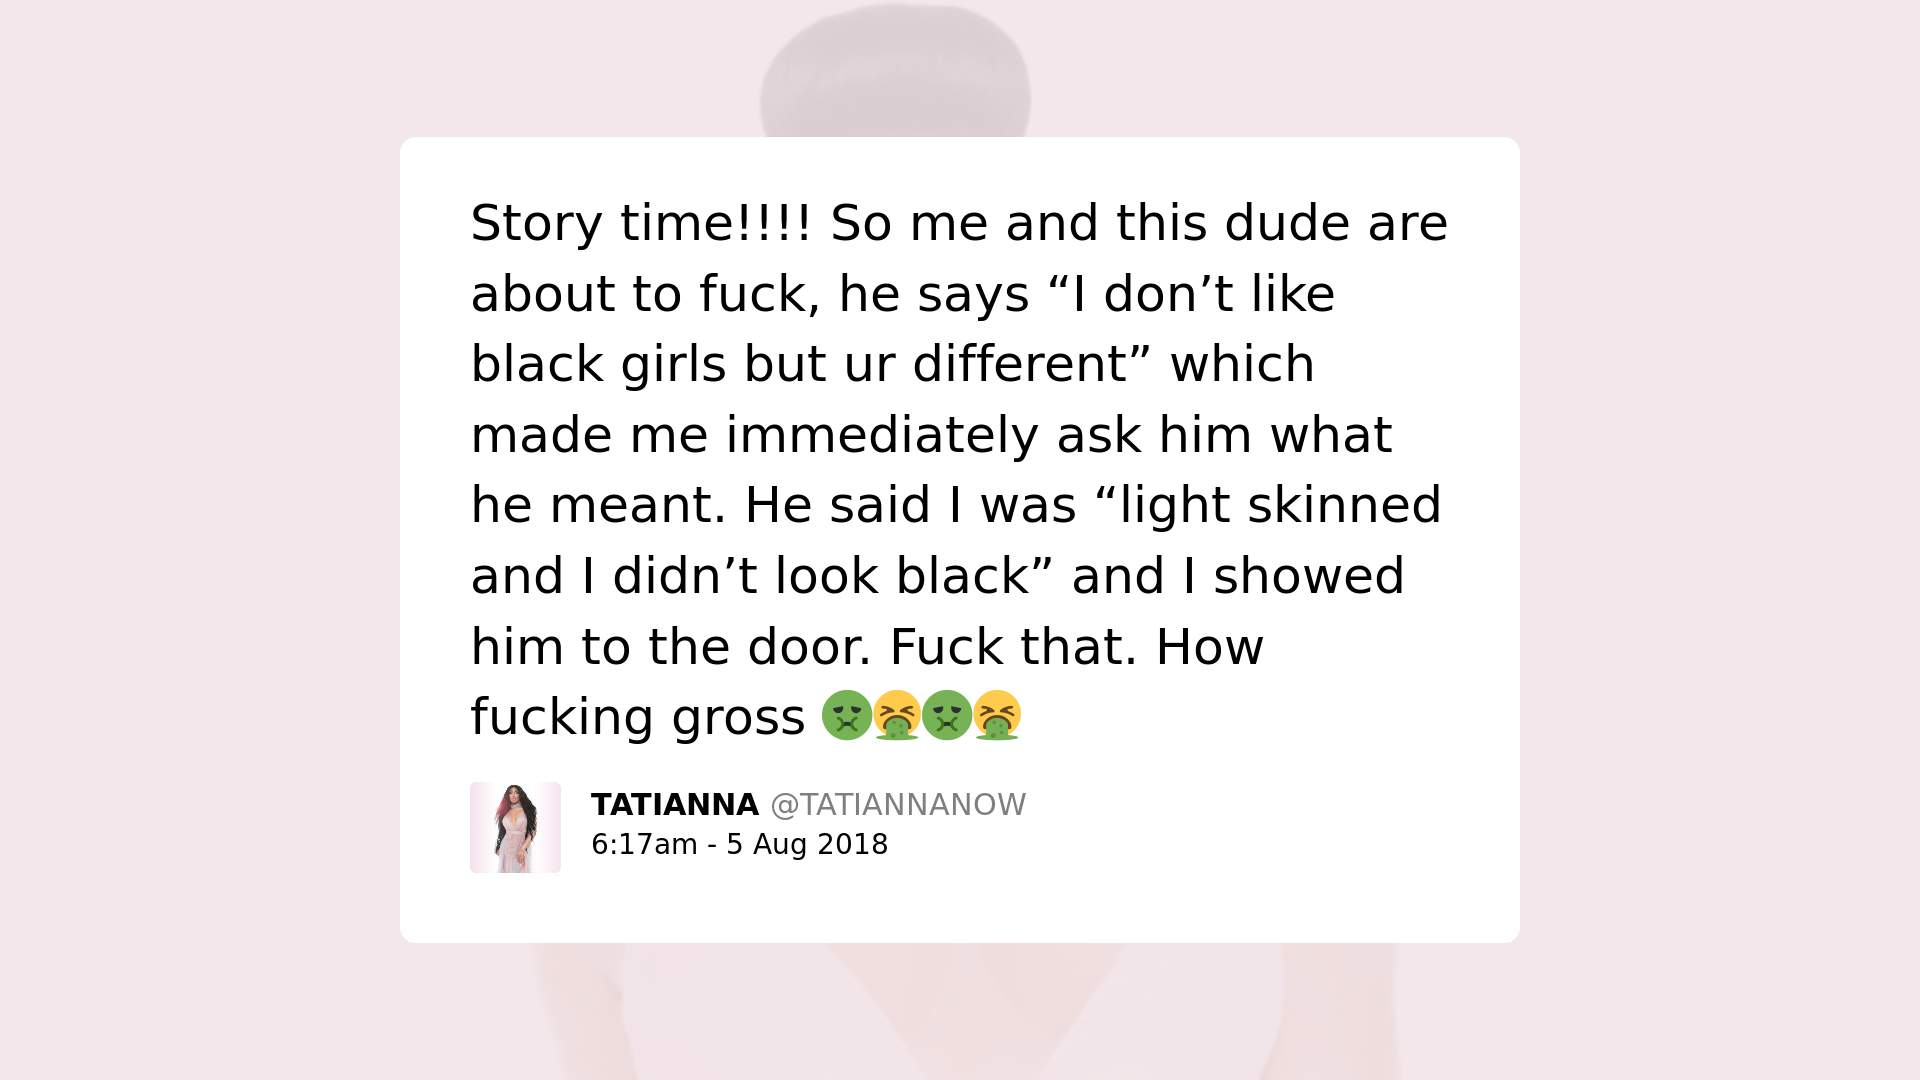 Print screen of a post by Tatianna Now with the text: Story time!!! So me and this dude are about to fuck, he says "I don't like black girls but ur different" which made me immediately ask him what he meant. He said I was "light skinned and I didn't look black" and I showed him the door. Fuck that. How fucking gross. 